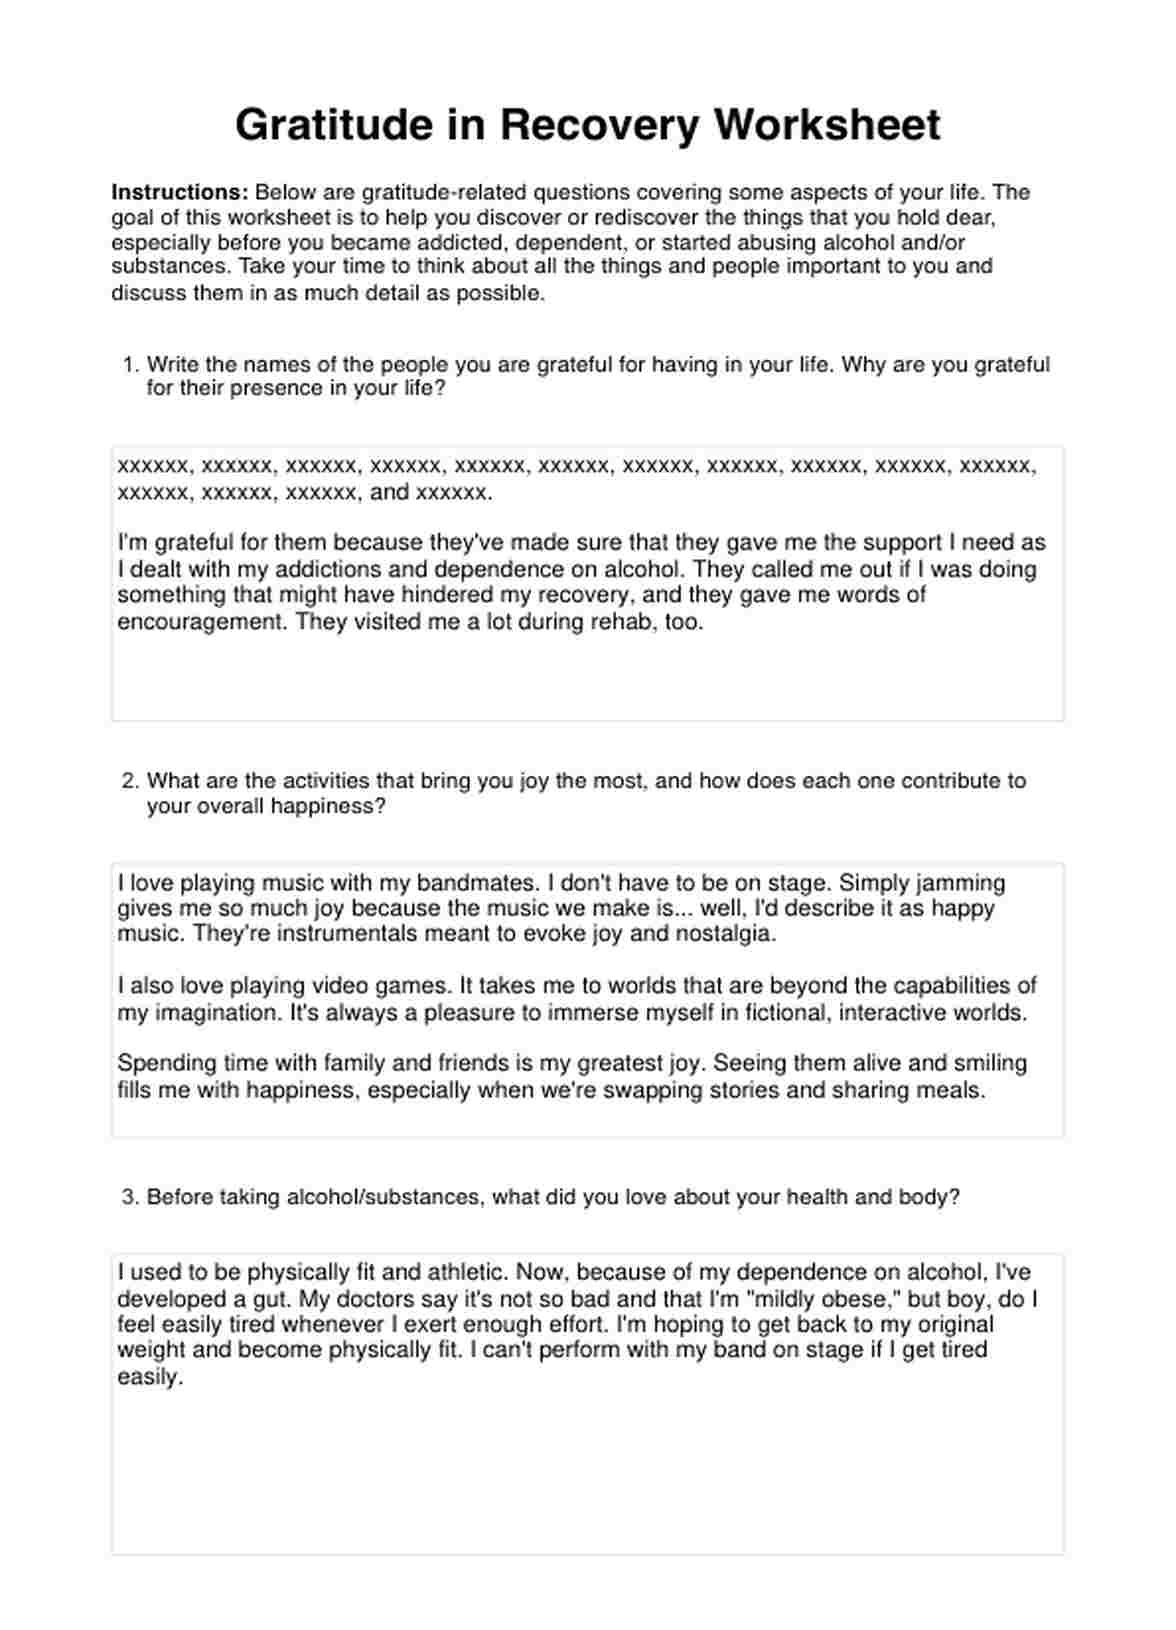 Gratitude in Recovery Worksheet PDF Example